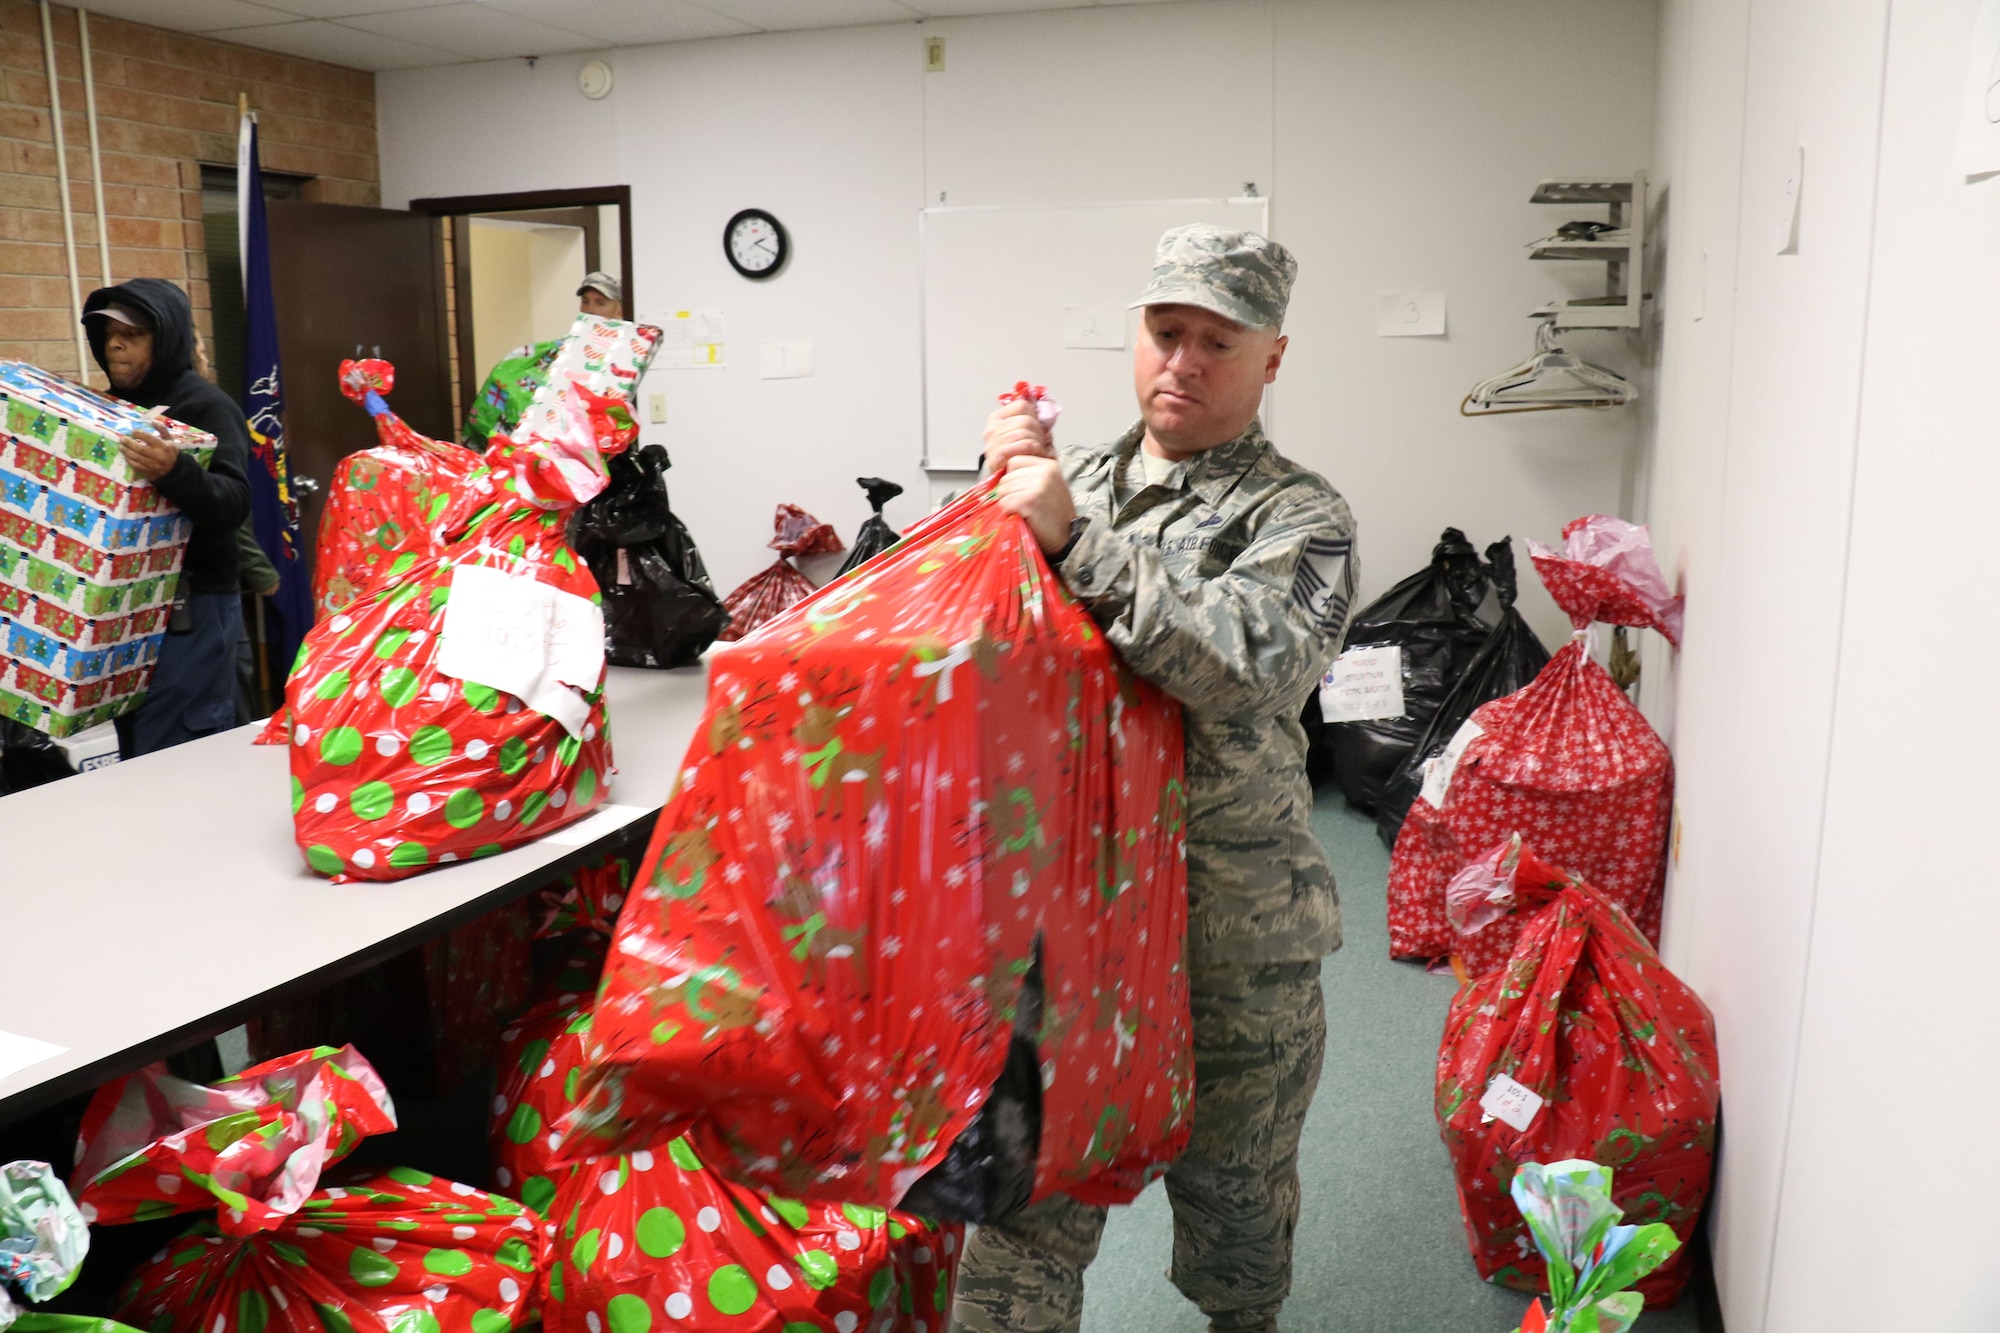 Senior Master Sgt. Matthew Mannion, 271st Combat Communications Squadron, unloads donated gifts at the Lebanon County assistance office, Lebanon, Pennsylvania, Dec. 6, 2017. The gifts were from 28th annual Holiday Wish Program gift drive and will be distributed to families and individuals in need. (U.S. Air National Guard photo by Master Sgt. Culeen Shaffer/Released)